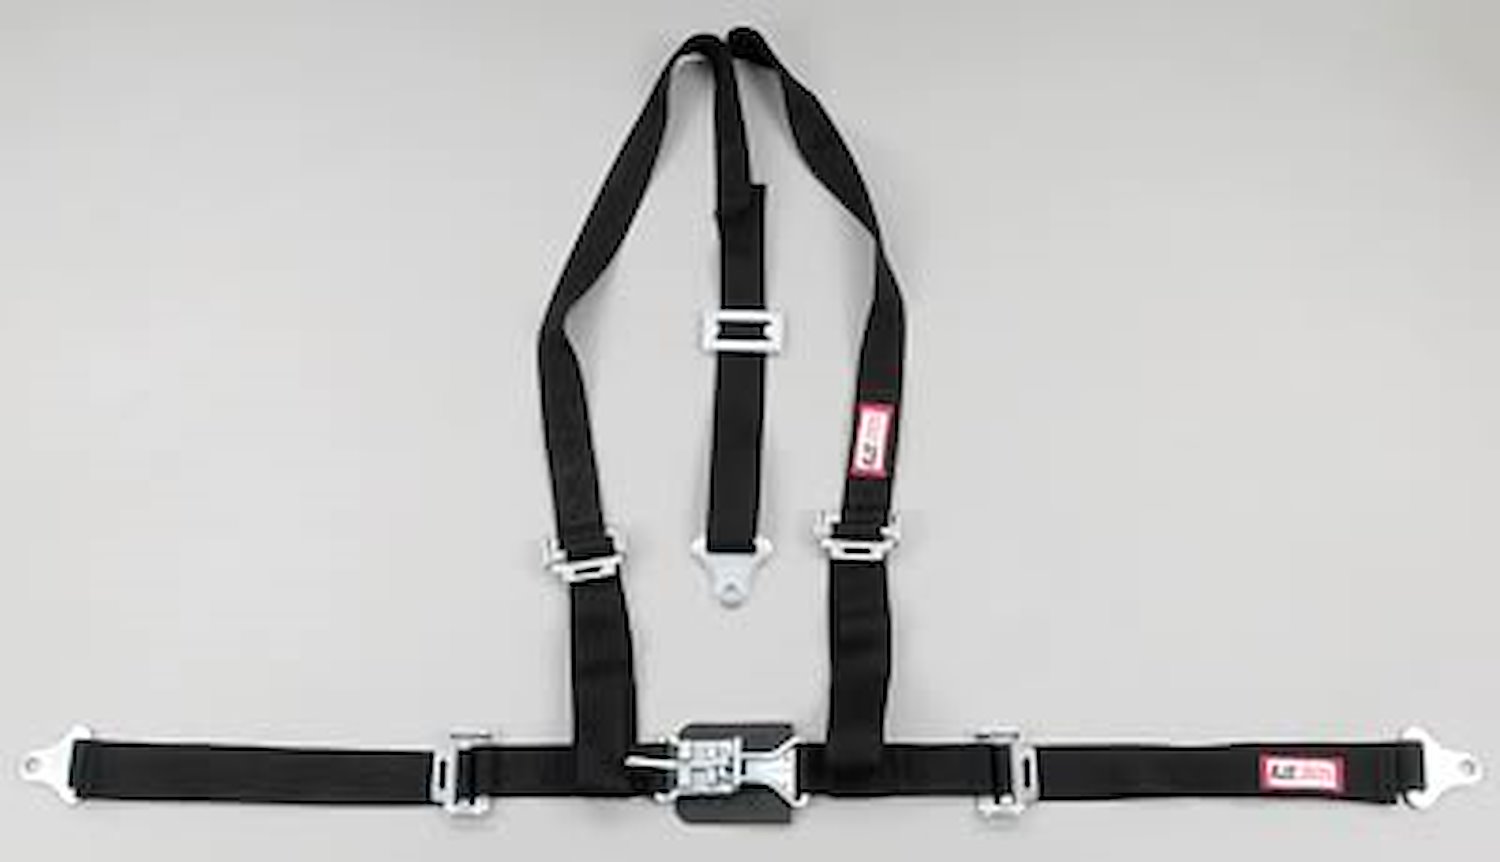 NON-SFI L&L HARNESS 2 PULL DOWN Lap Belt SEWN IN 2 S.H. INDIVIDUAL FLOOR Mount w/STERNUM STRAP ALL WRAP ENDS HOT PINK